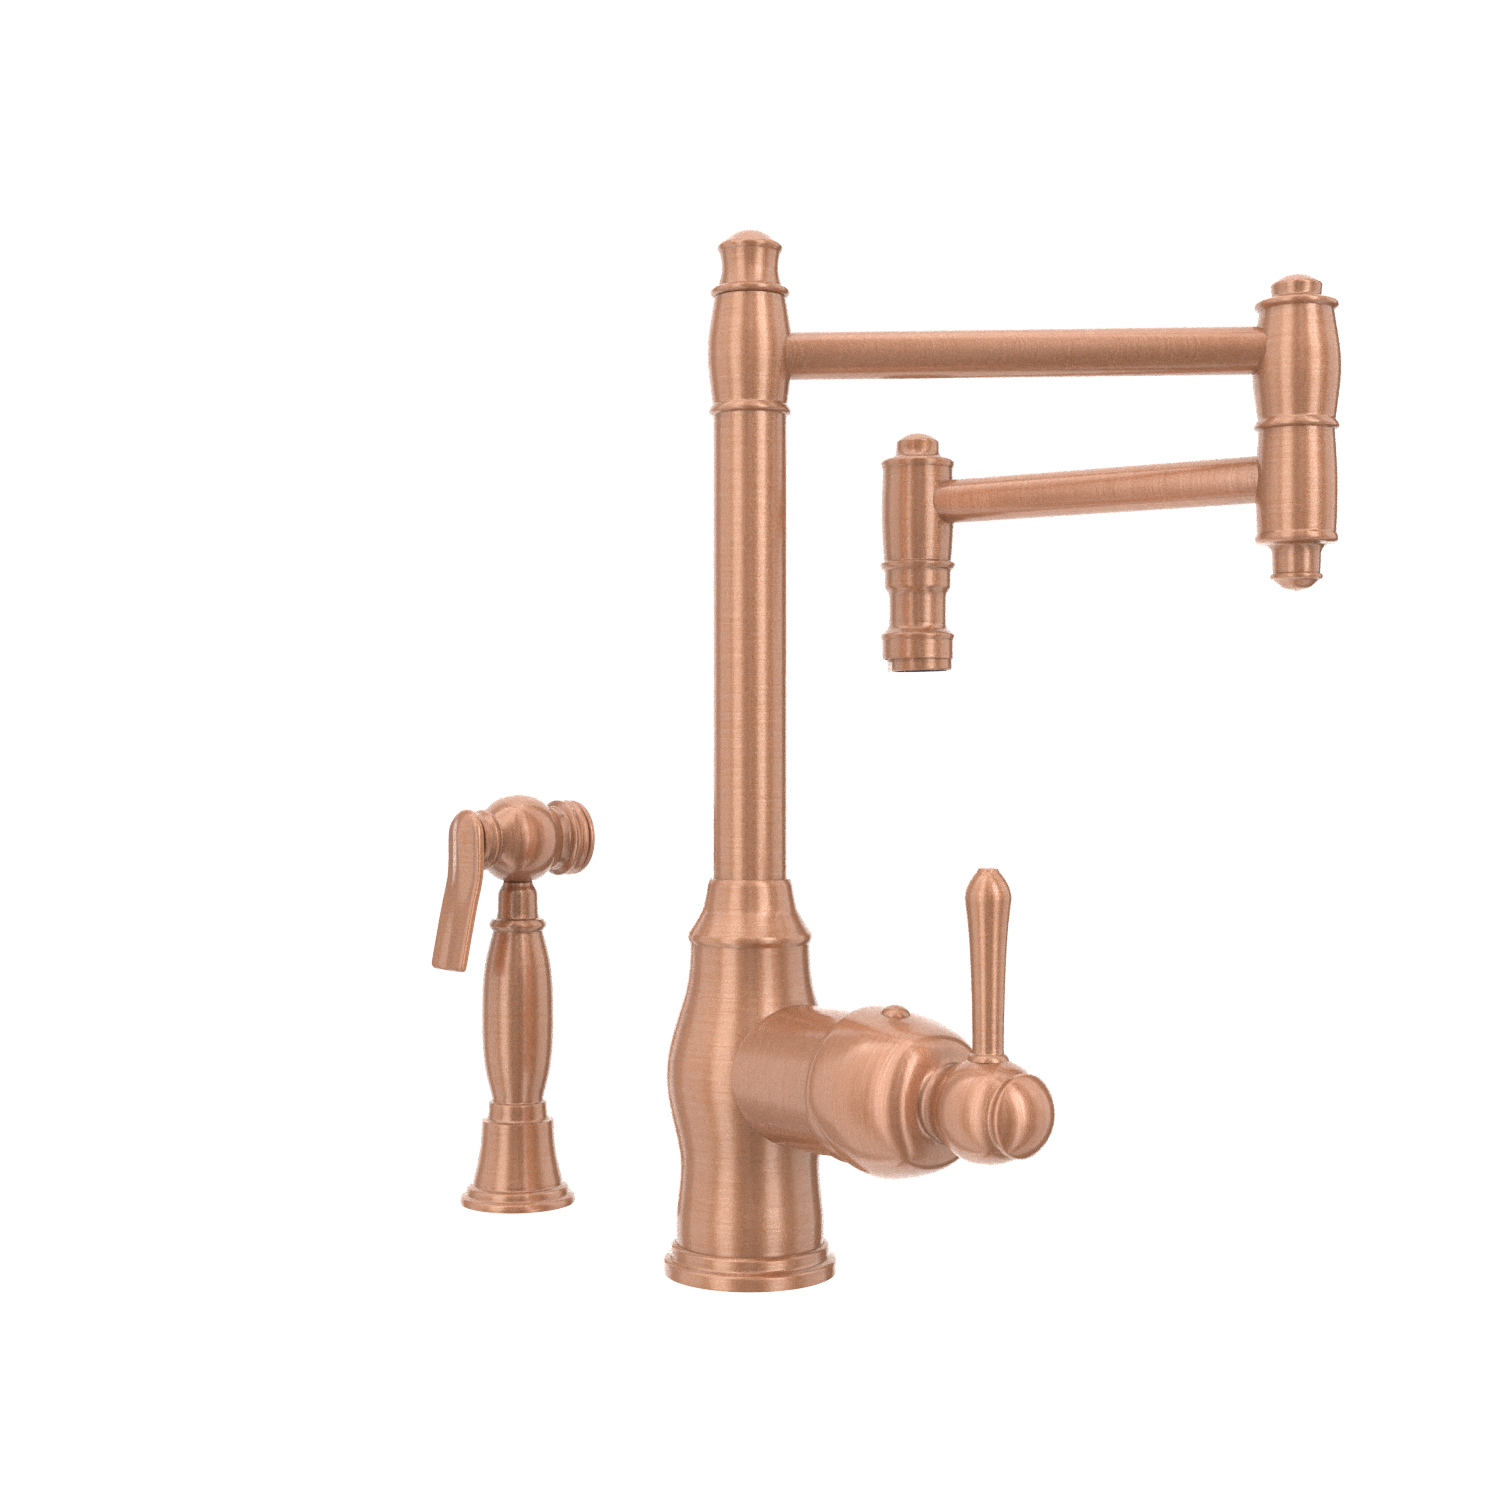 One-Handle Copper Pot Filler Kitchen Faucet with Side Sprayer - AK96918P2